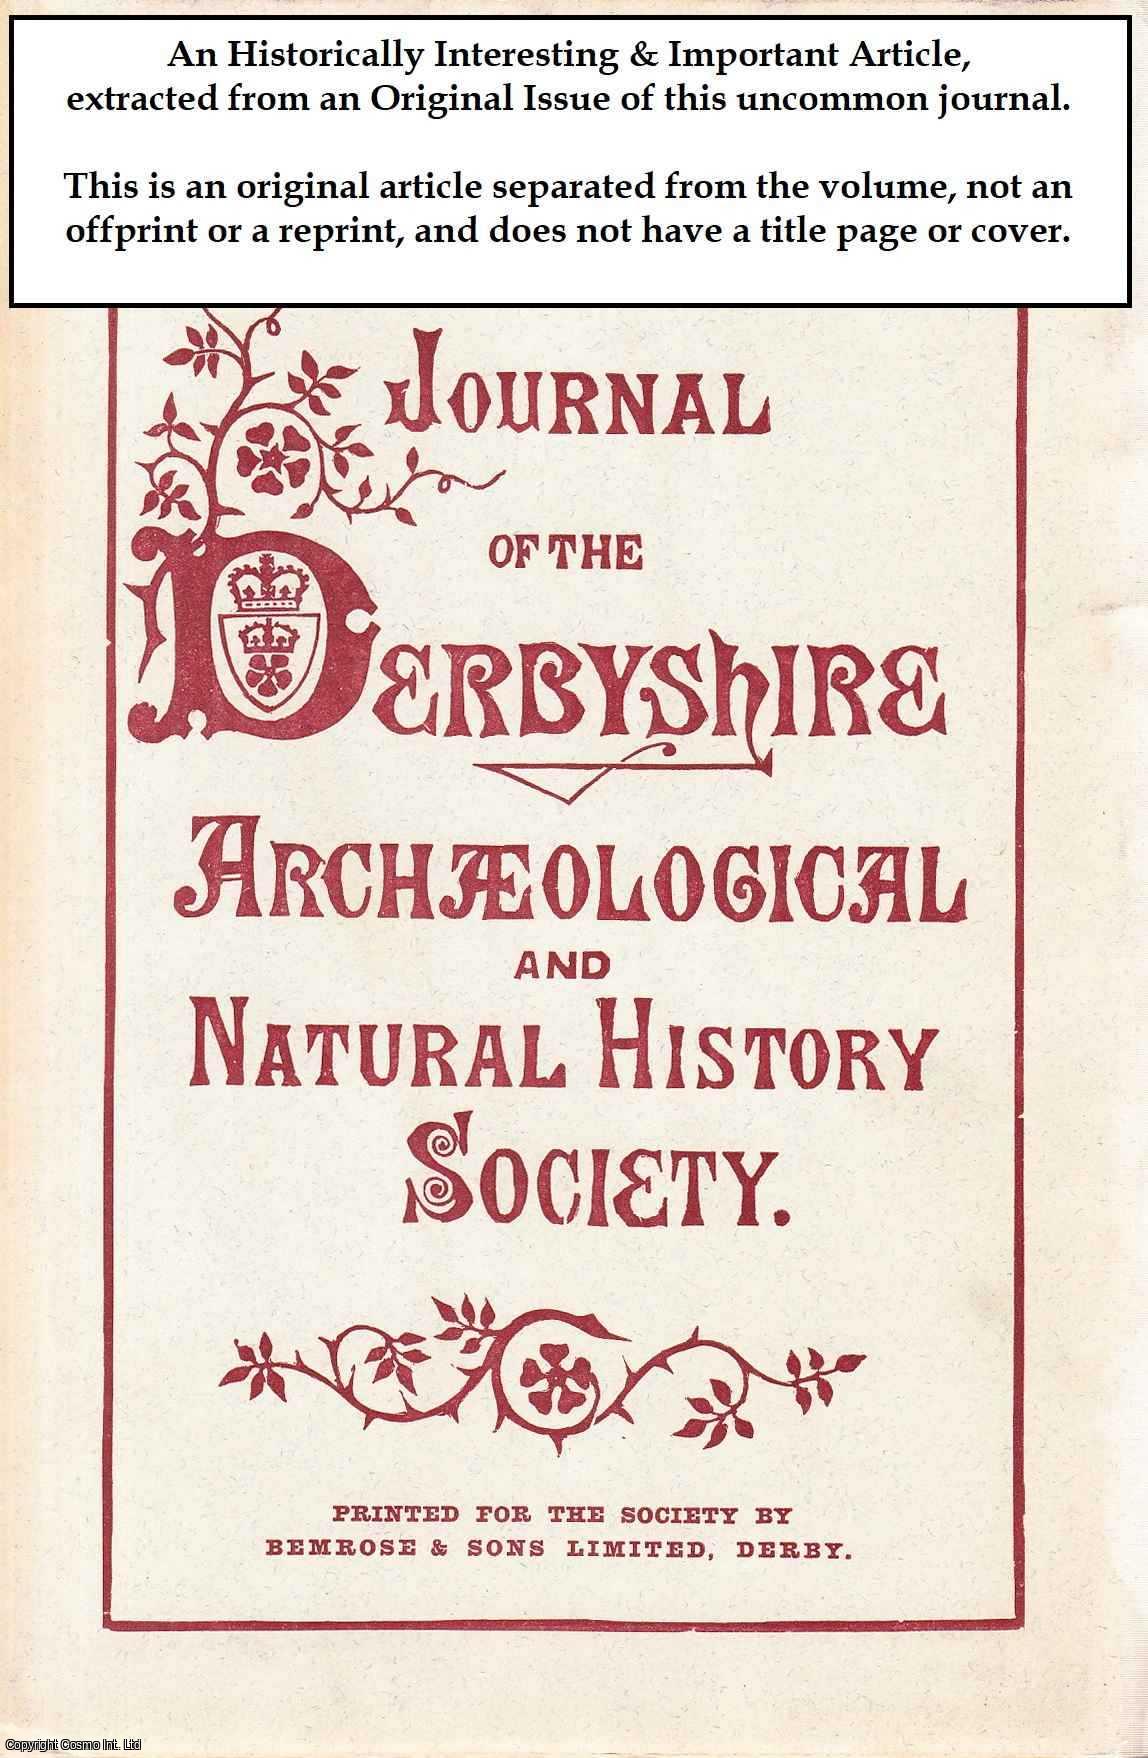 S. O. Addy - Rectory Manors in Derbyshire. An original article from the Journal of the Derbyshire Archaeological & Natural History Society, 1915.